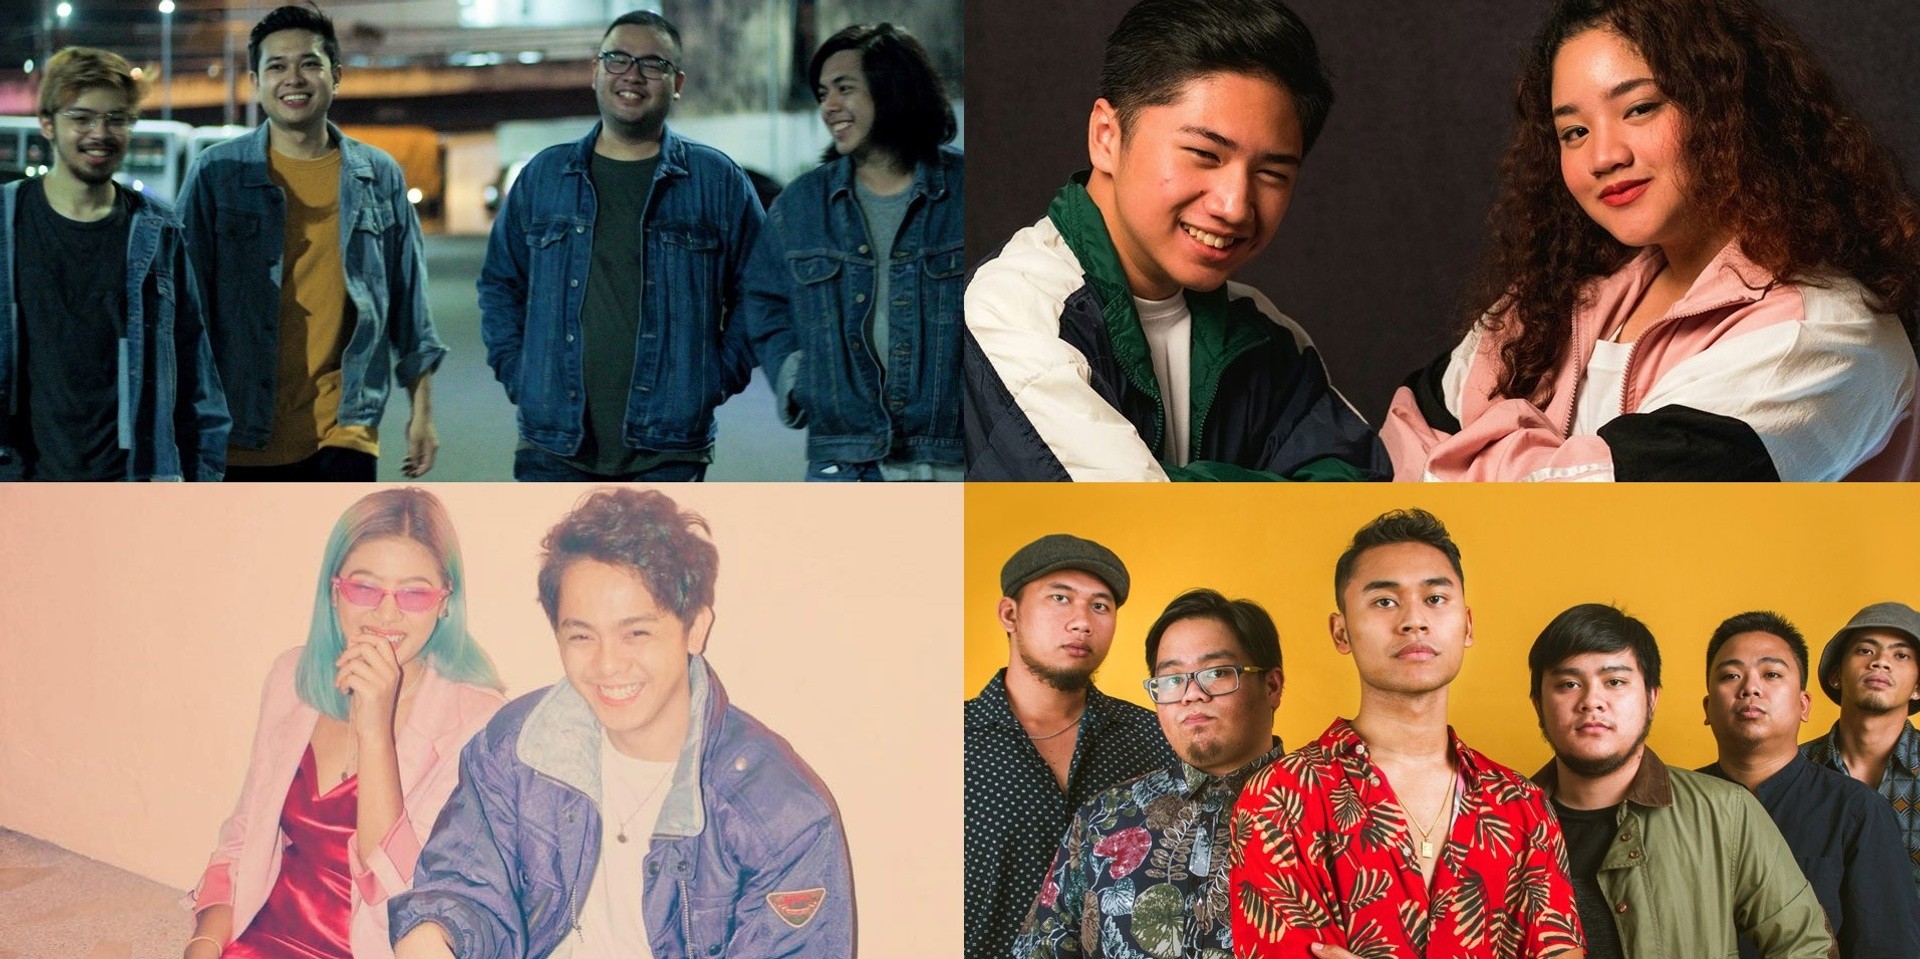 Here are the Wanderbattle 2019 quarter finalists